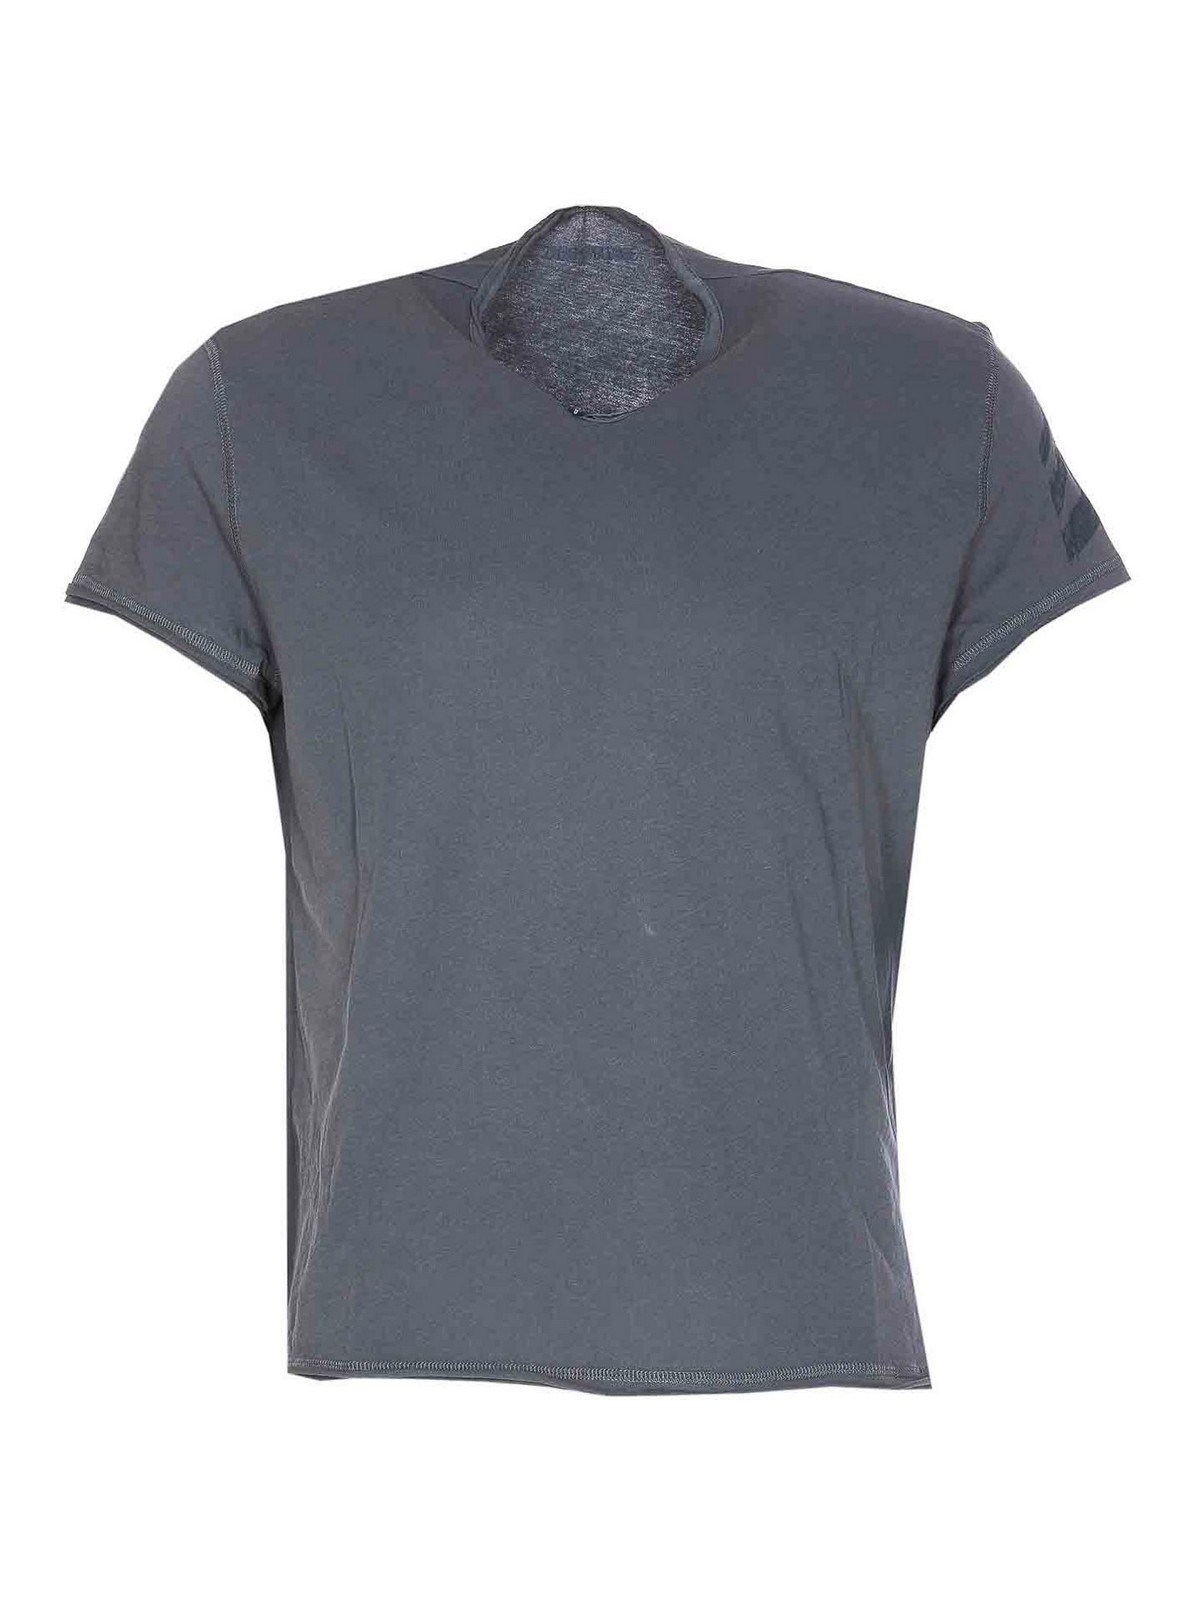 Zadig & Voltaire Grey Tee V-neck Buttons On Collar